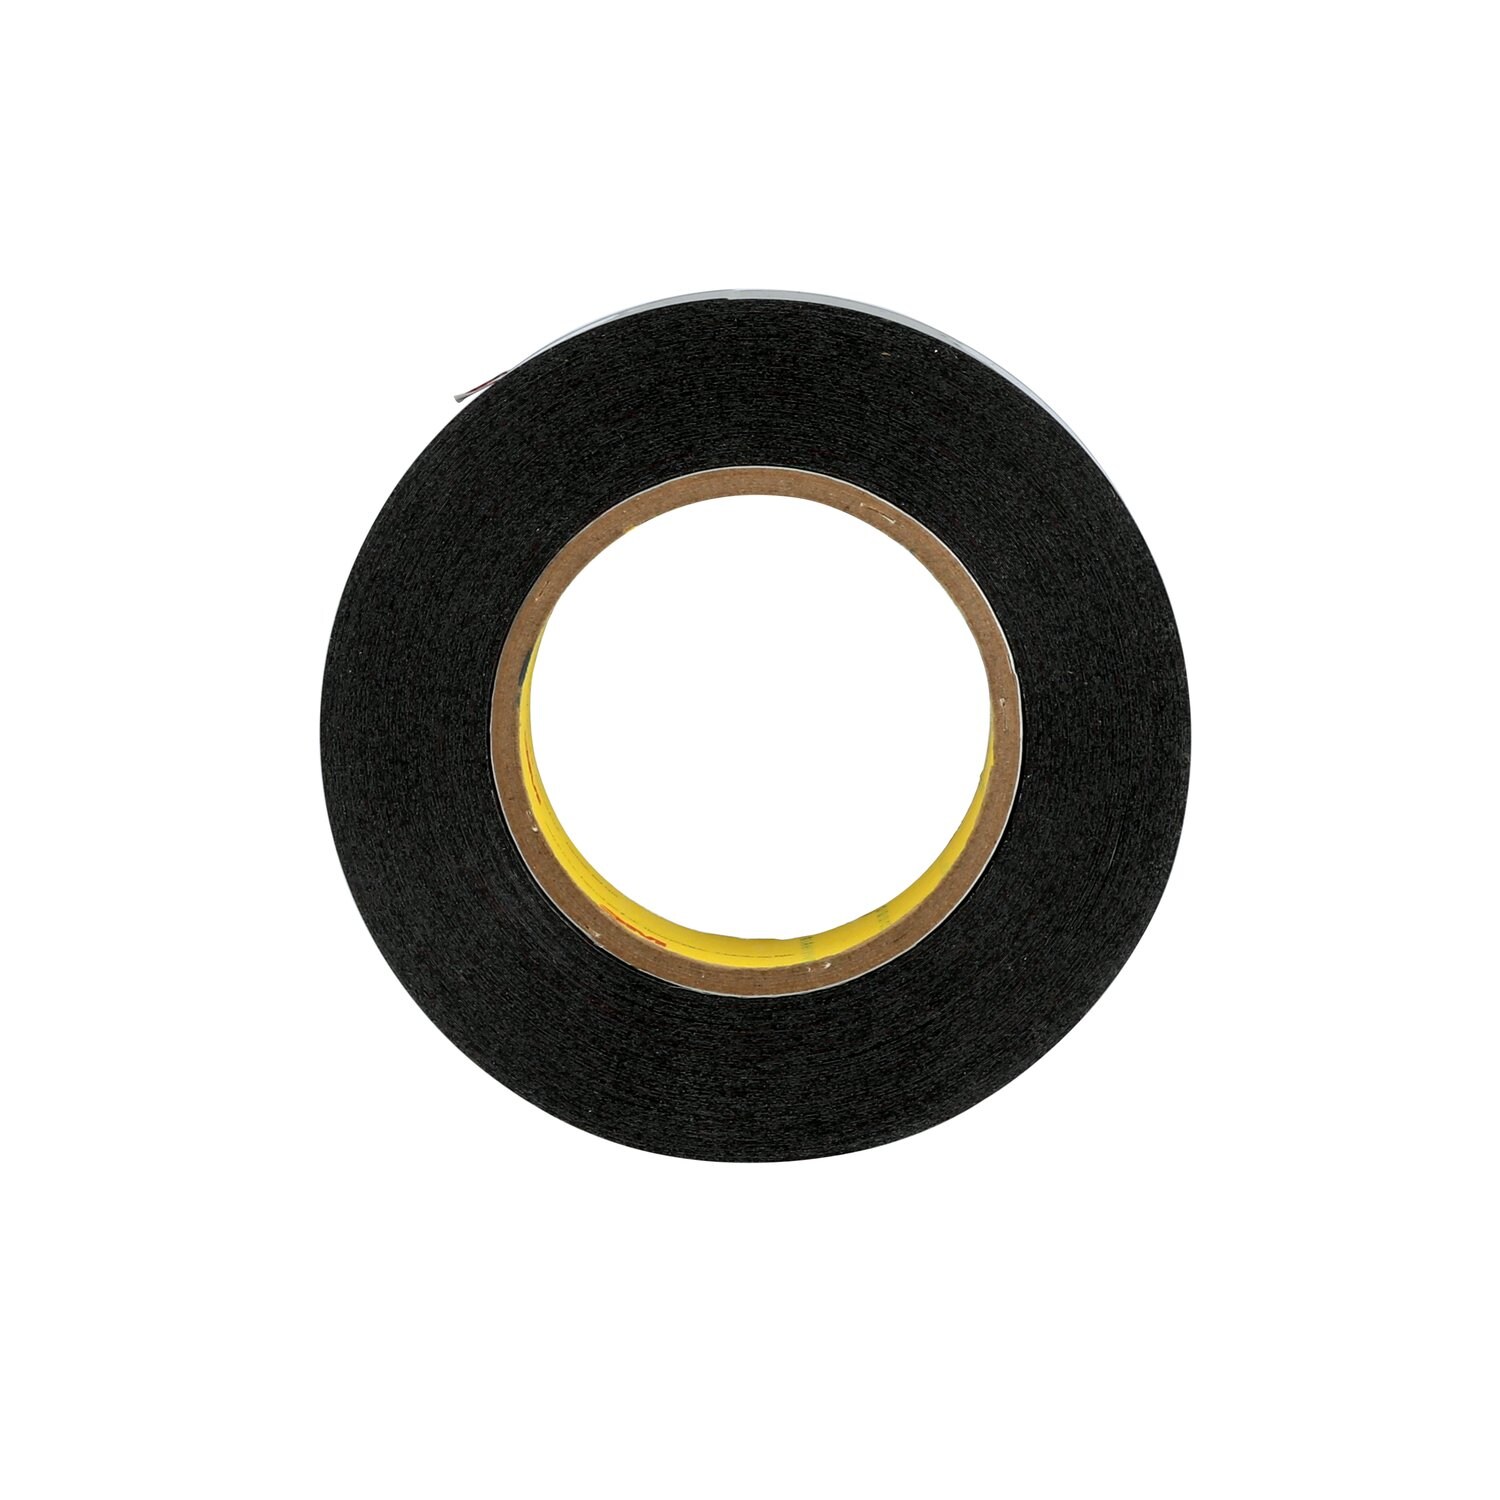 7000048543 - 3M Polyurethane Protective Tape 8544, Black, PET Liner, 2 in x 36 yd, 6
Rolls/Case